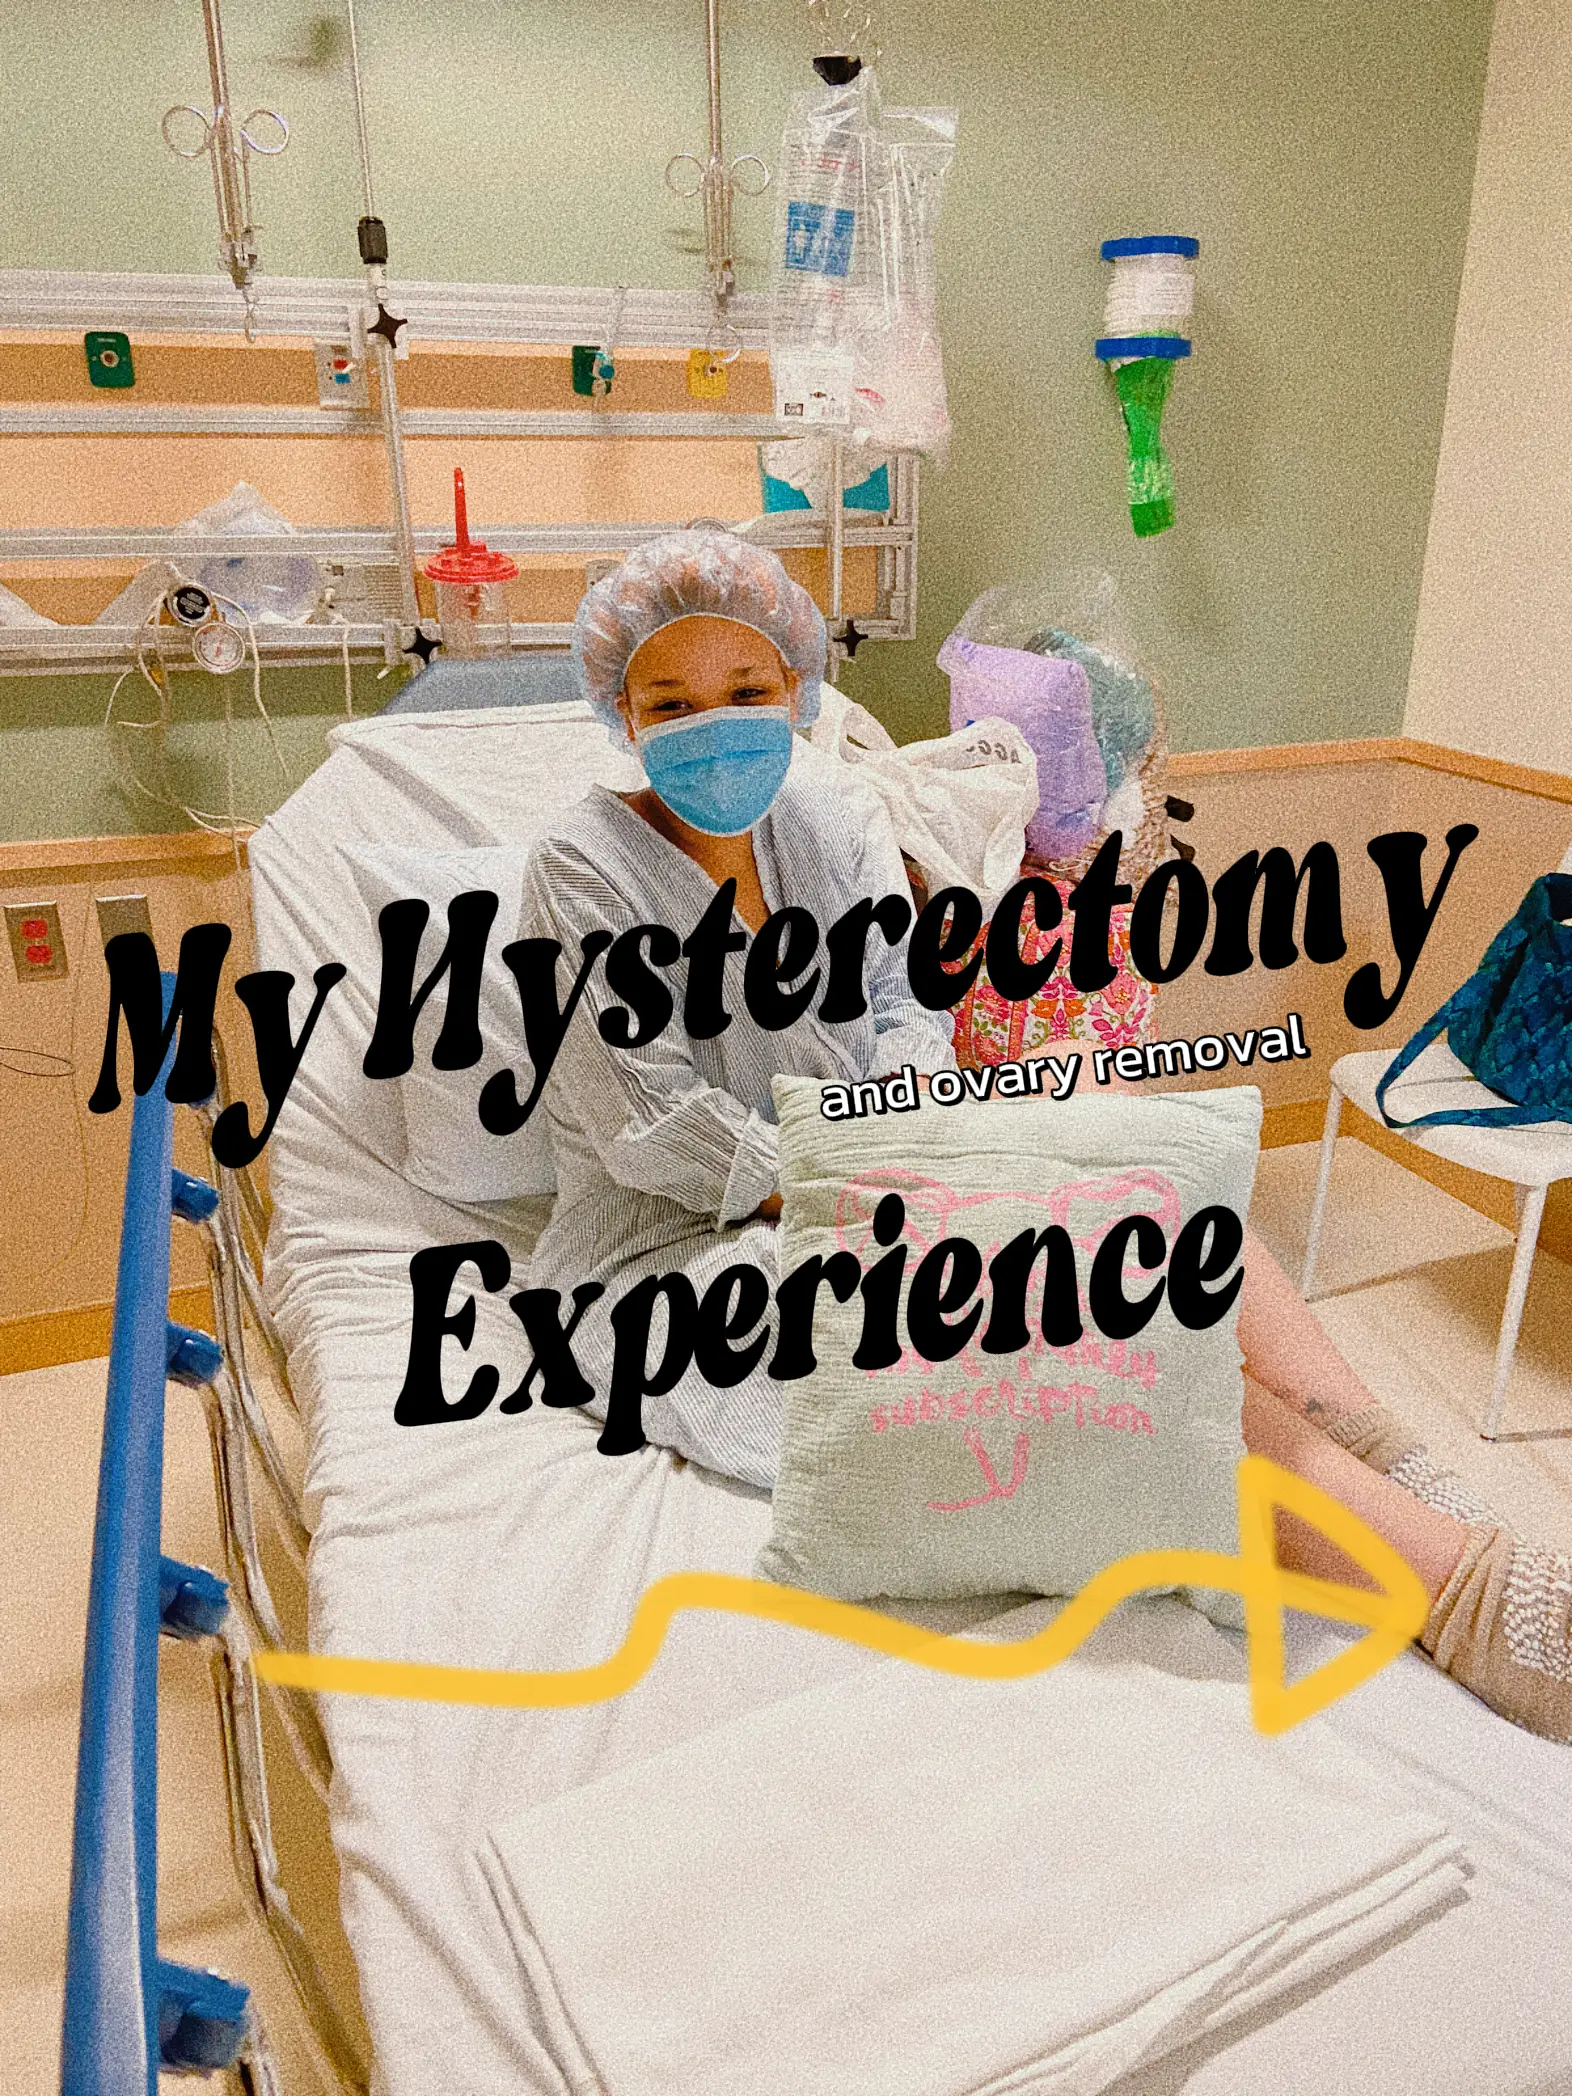 hysterectomy recovery chart - Lemon8 Search